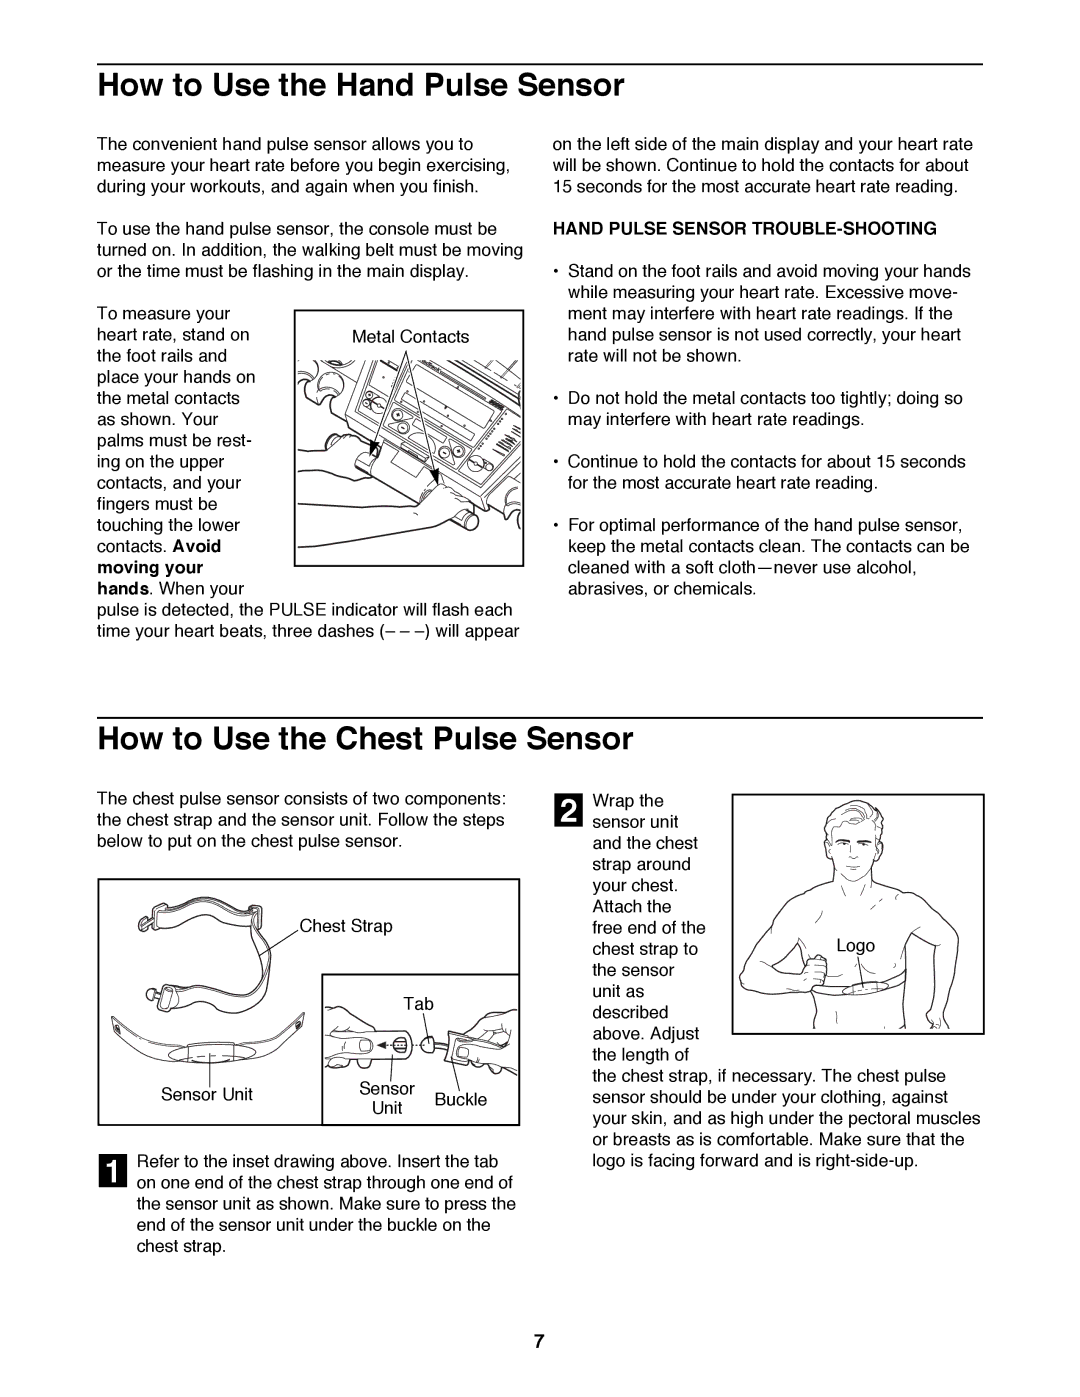 NordicTrack NTTL24080 manual How to Use the Hand Pulse Sensor, How to Use the Chest Pulse Sensor 